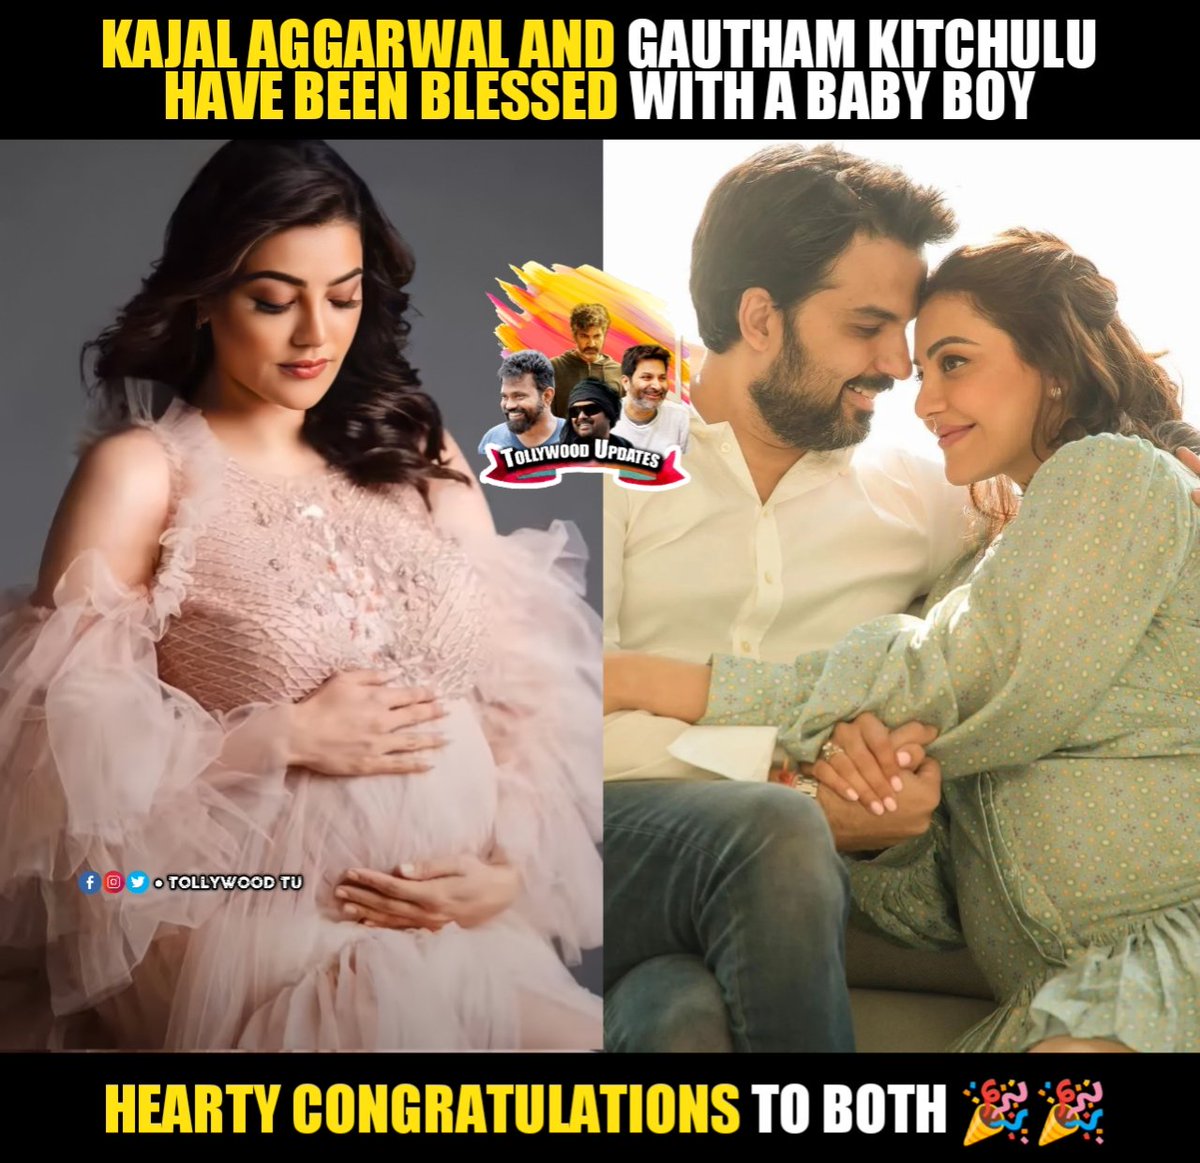 #KajalAggarwal & #GautamKitchlu blessed with Baby Boy👨‍👩‍👦

Congratulations to the couple 🎉🎉